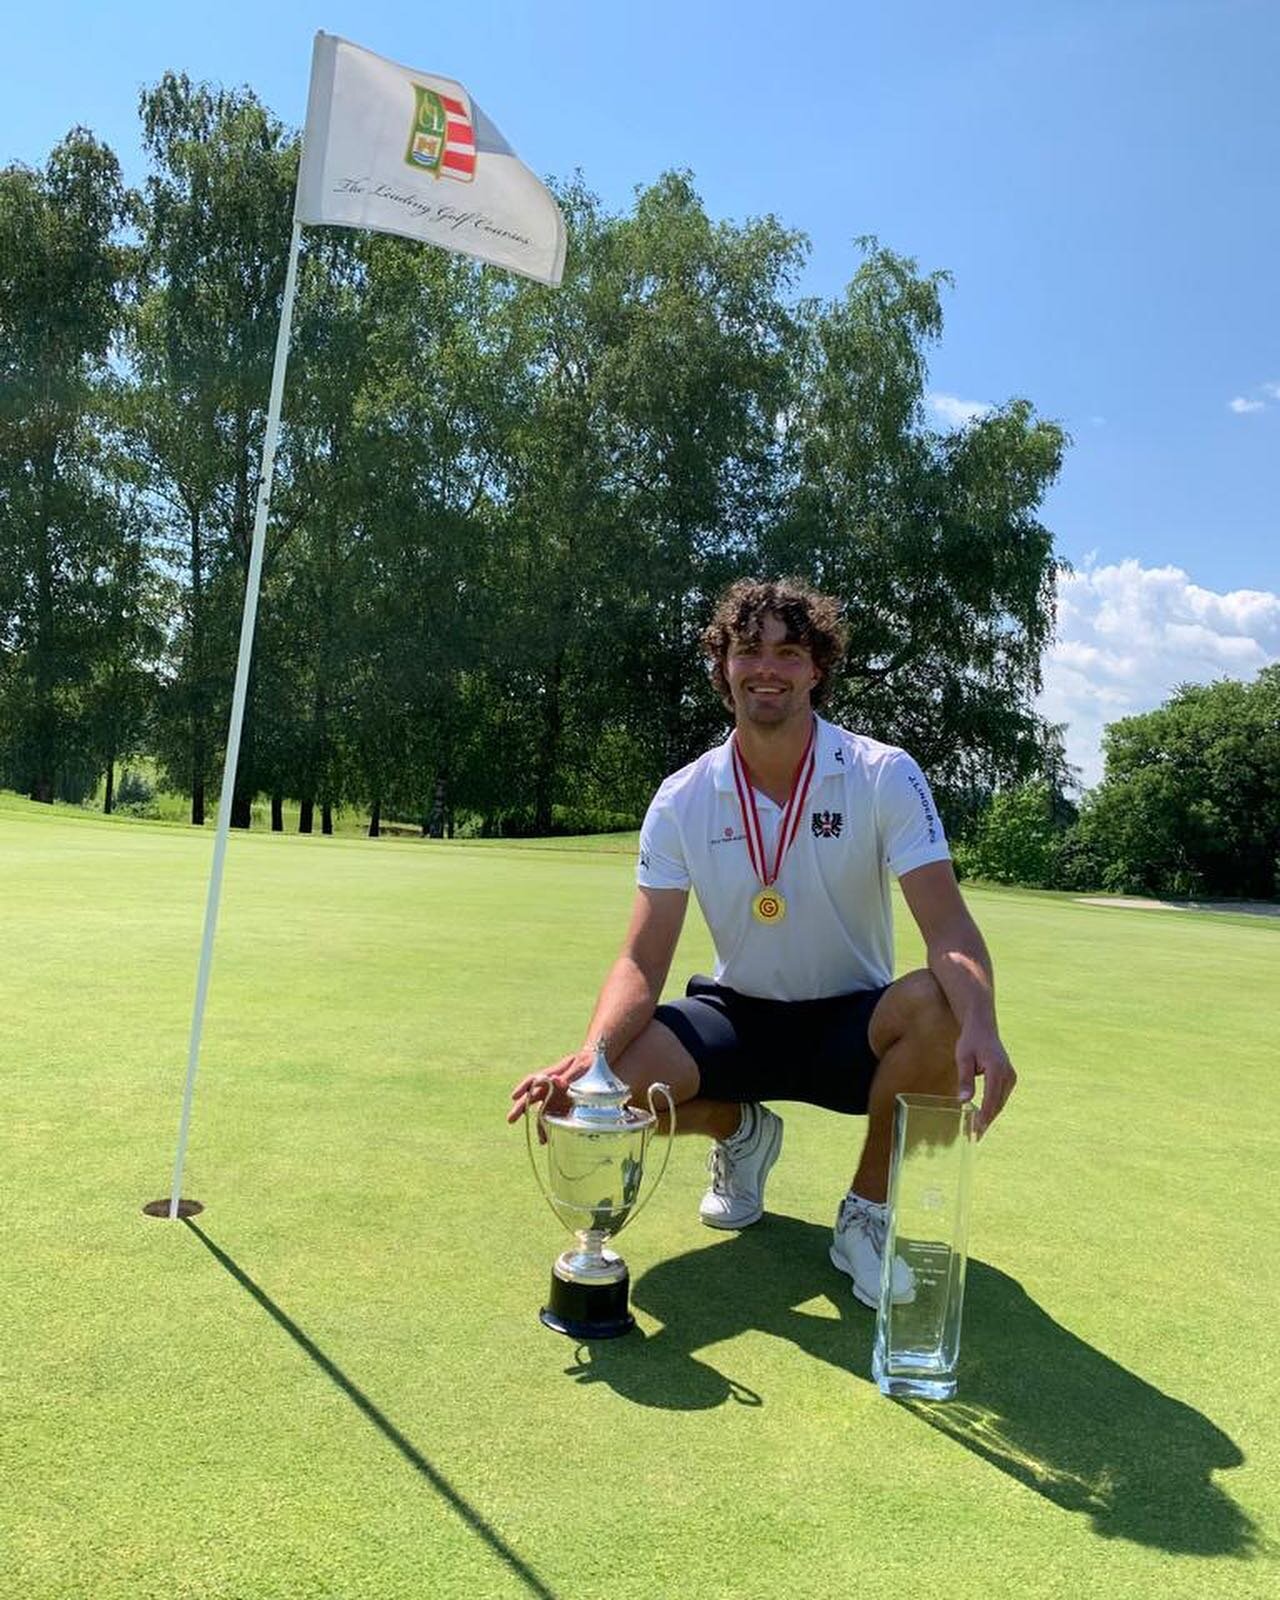 Austrian International Amateur Championship🏆

Great feeling to perform in front of familiar faces! Including my family❤️ @gclinz 
@csumgolf @golf.at 
#gclinz #gorams